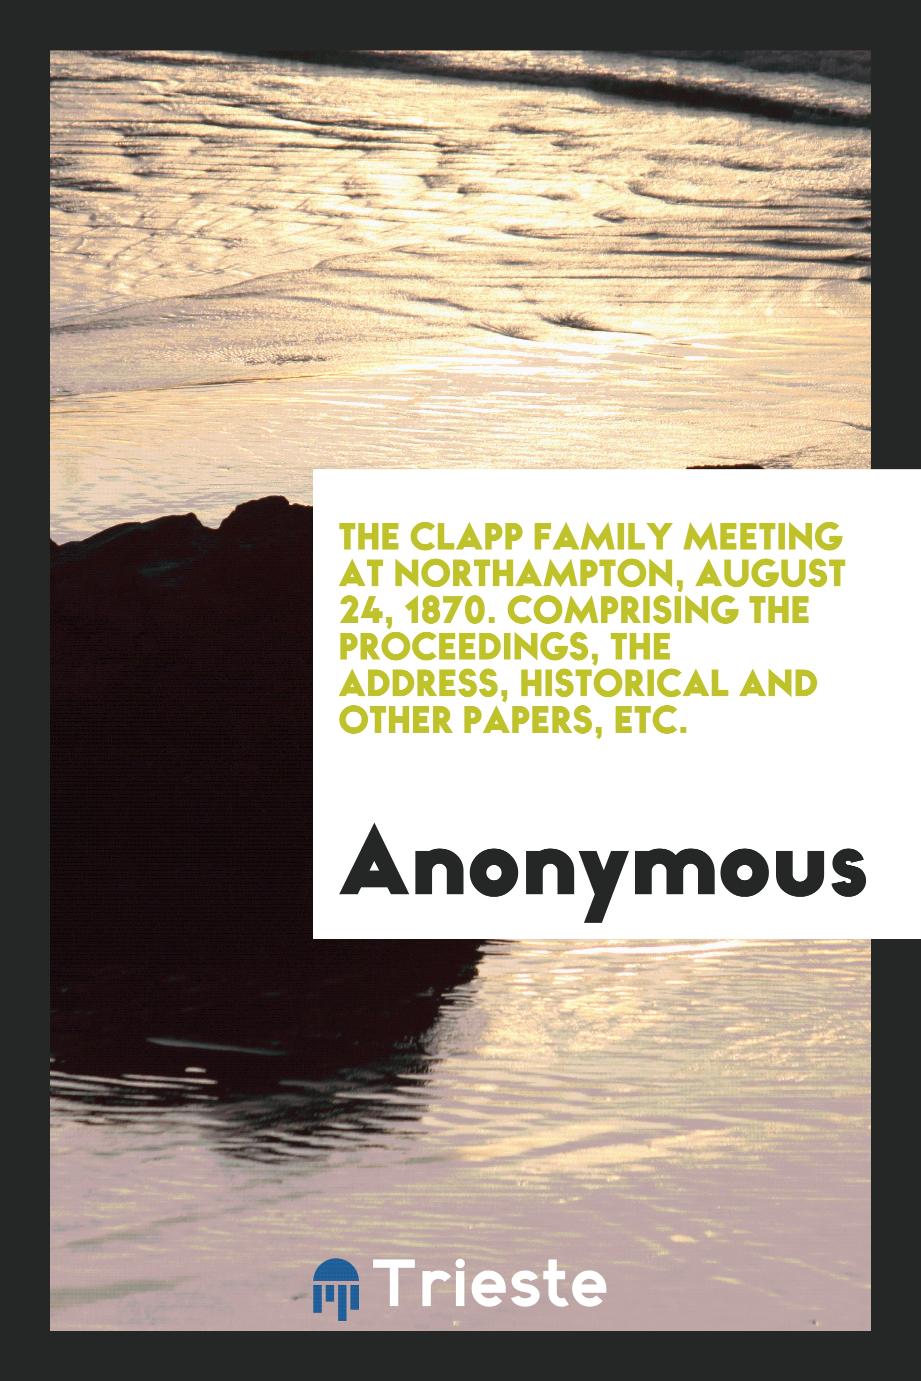 The Clapp family meeting at Northampton, August 24, 1870. Comprising the proceedings, the address, historical and other papers, etc.